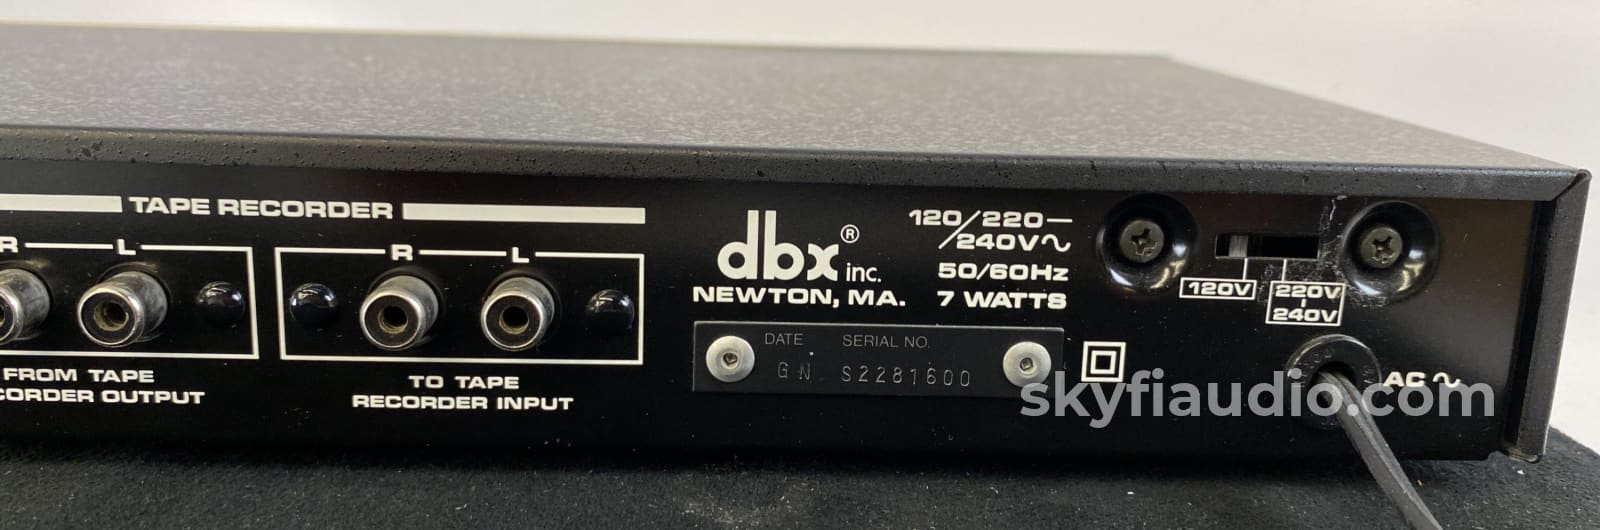 Dbx 228 Dynamic Range Expander/Tape Noise Reduction System Accessory